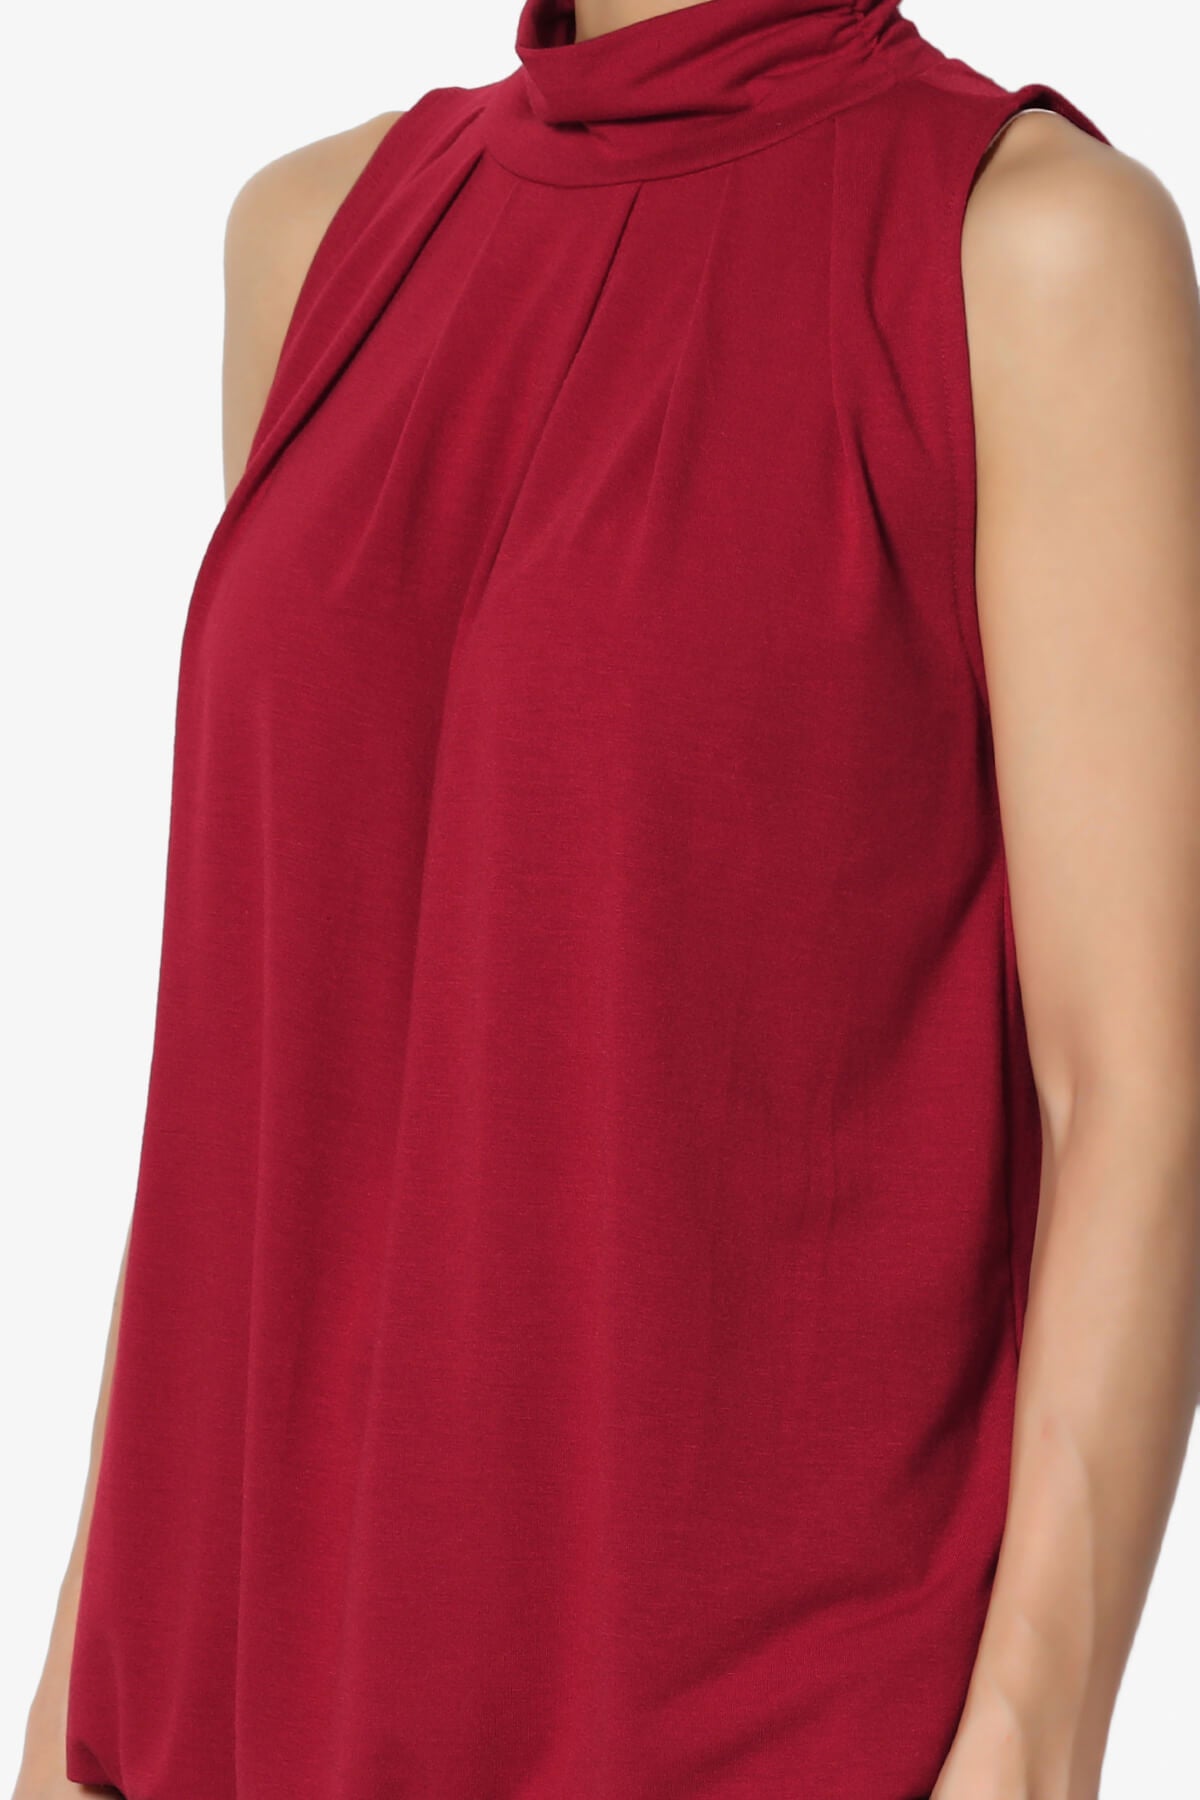 Load image into Gallery viewer, Jibbitz Sleeveless Mock Neck Pleated Top BURGUNDY_5
